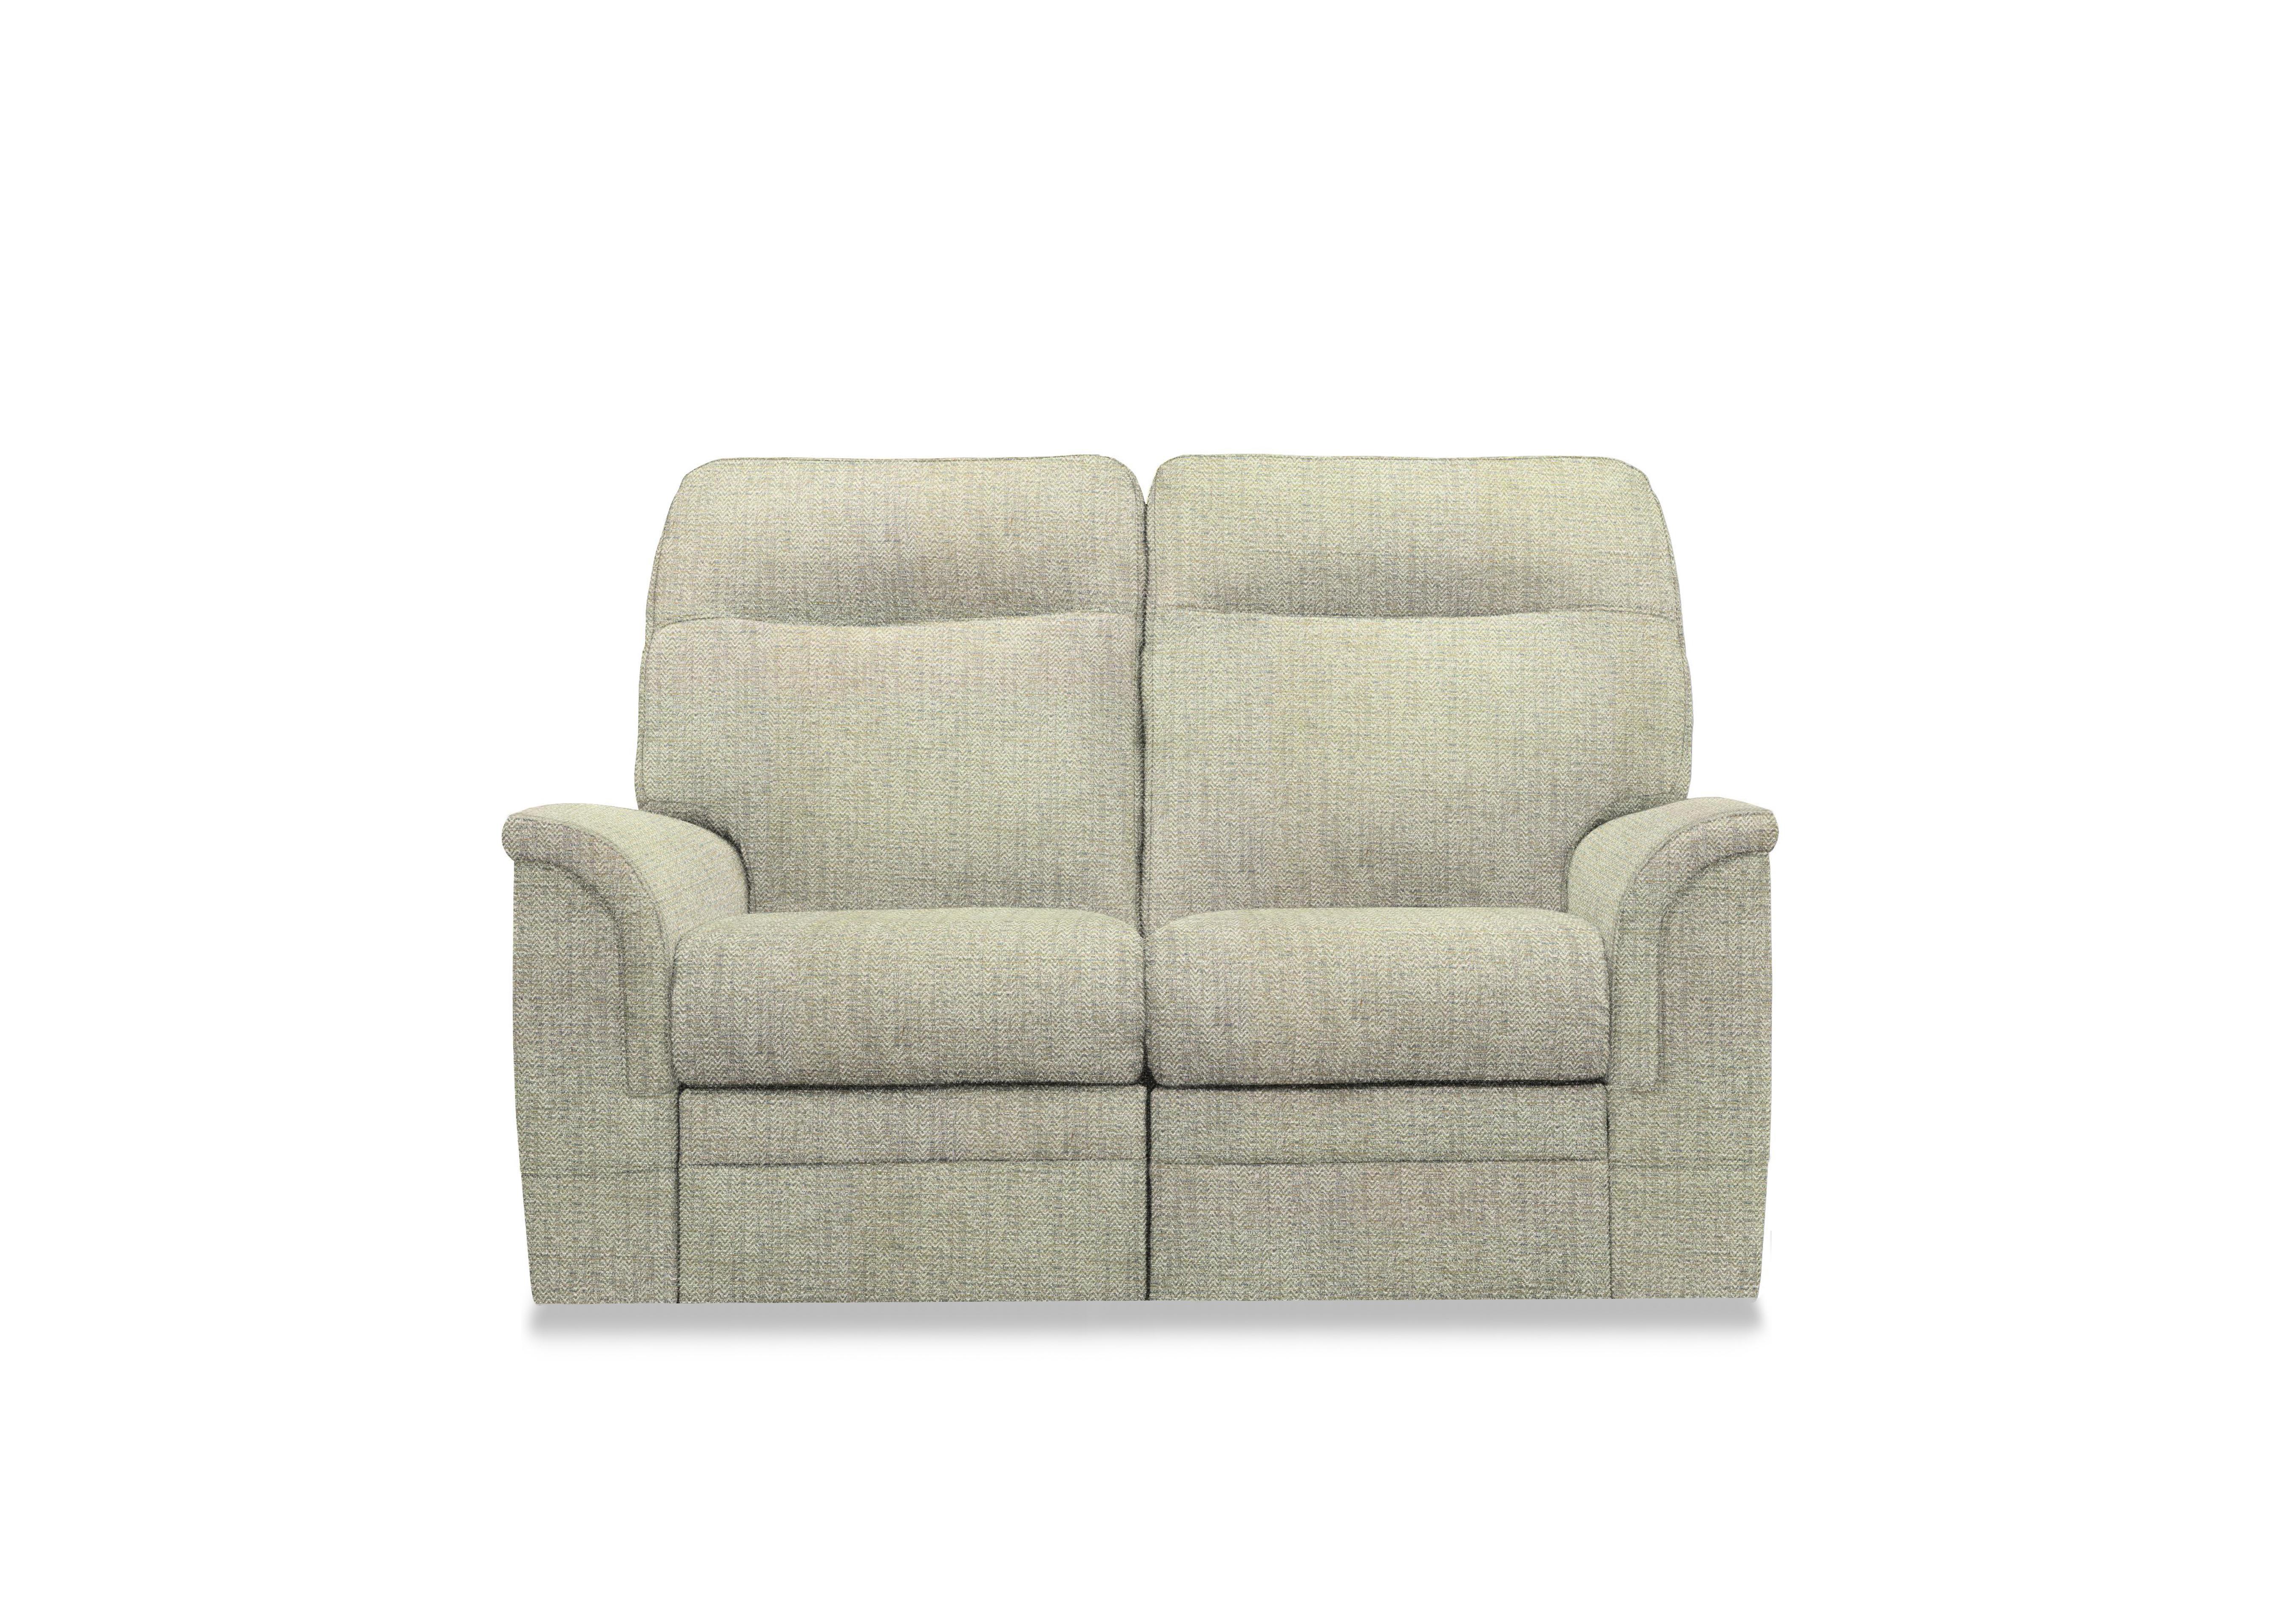 Hudson 23 Fabric 2 Seater Power Recliner Sofa with Power Headrests and Power Lumbar in Cromwell Mint 001355-0069 on Furniture Village